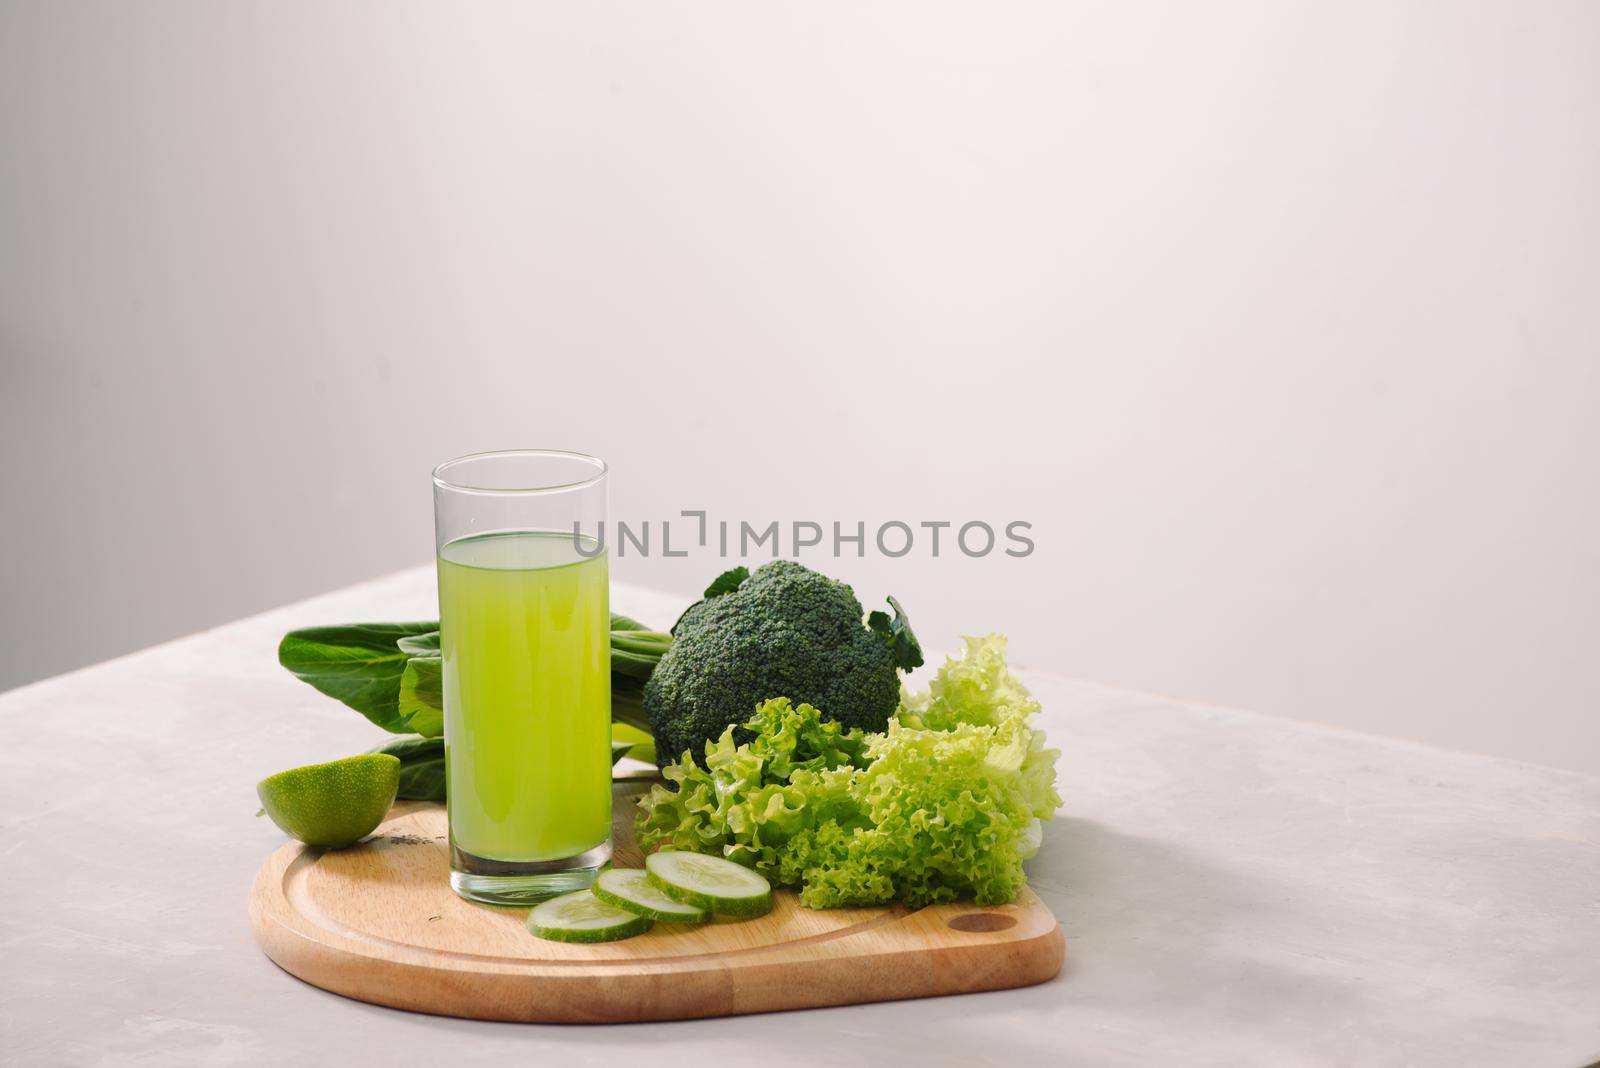 Various freshly squeezed vegetable juices for Fasting